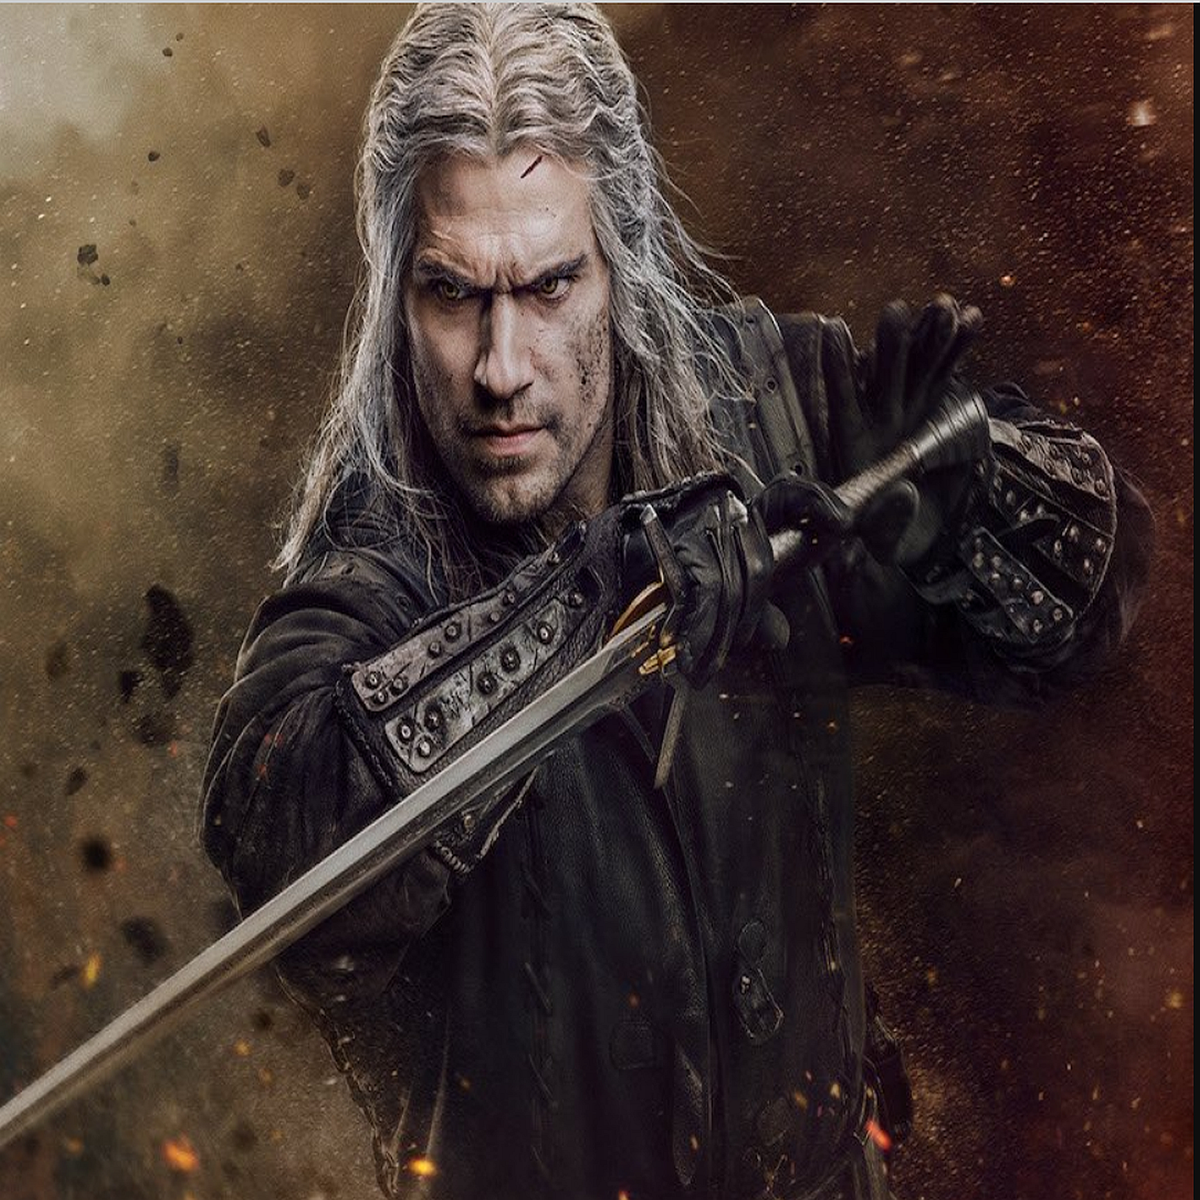 The Witcher season 3: 'The Witcher' season 3: Release date